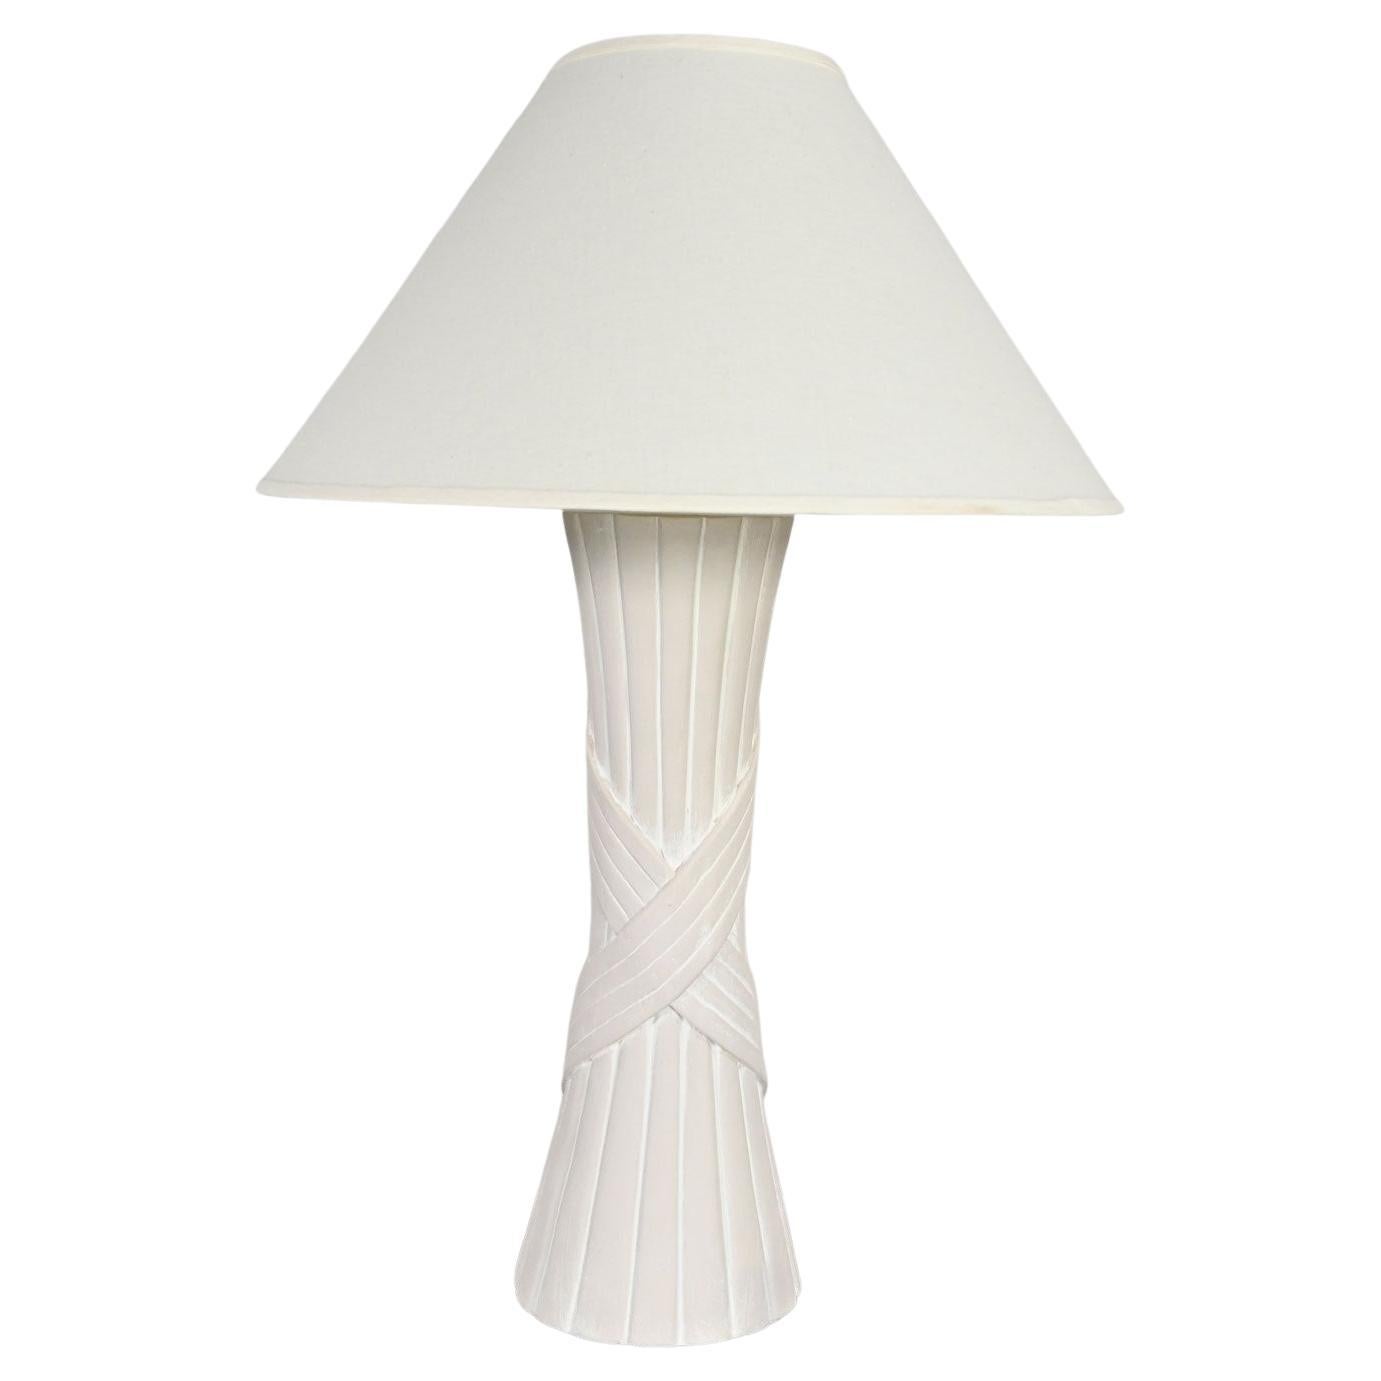 Vintage Modern White Plaster Faux Rattan Design Table Lamp with Coolie Shade 